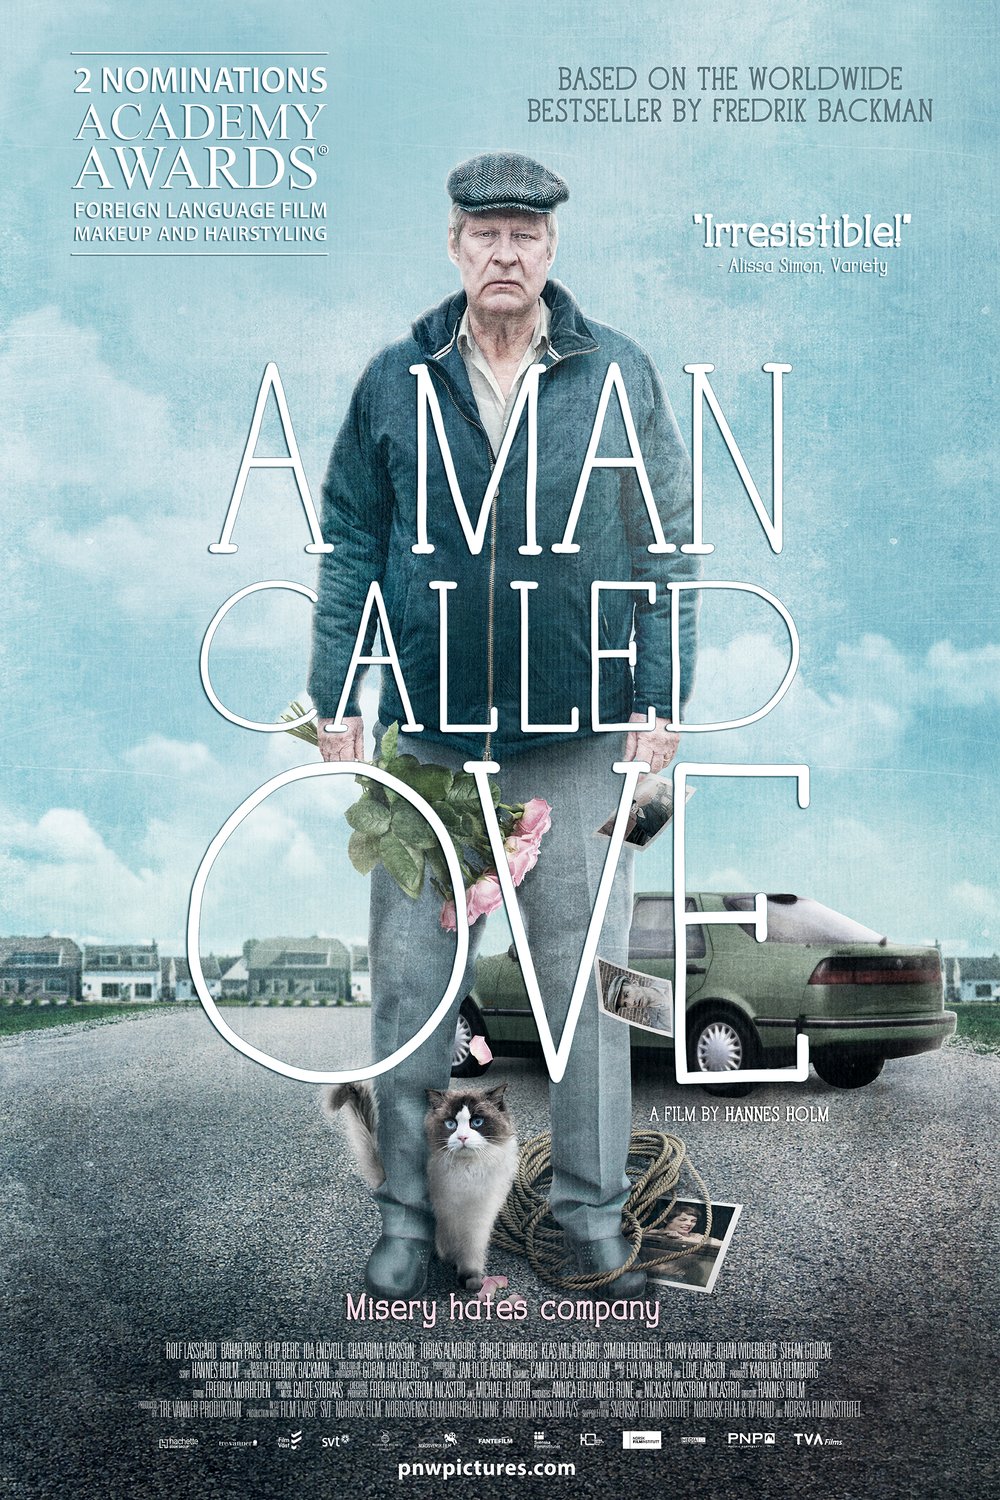 A Man Called Ove 15 By Hannes Holm